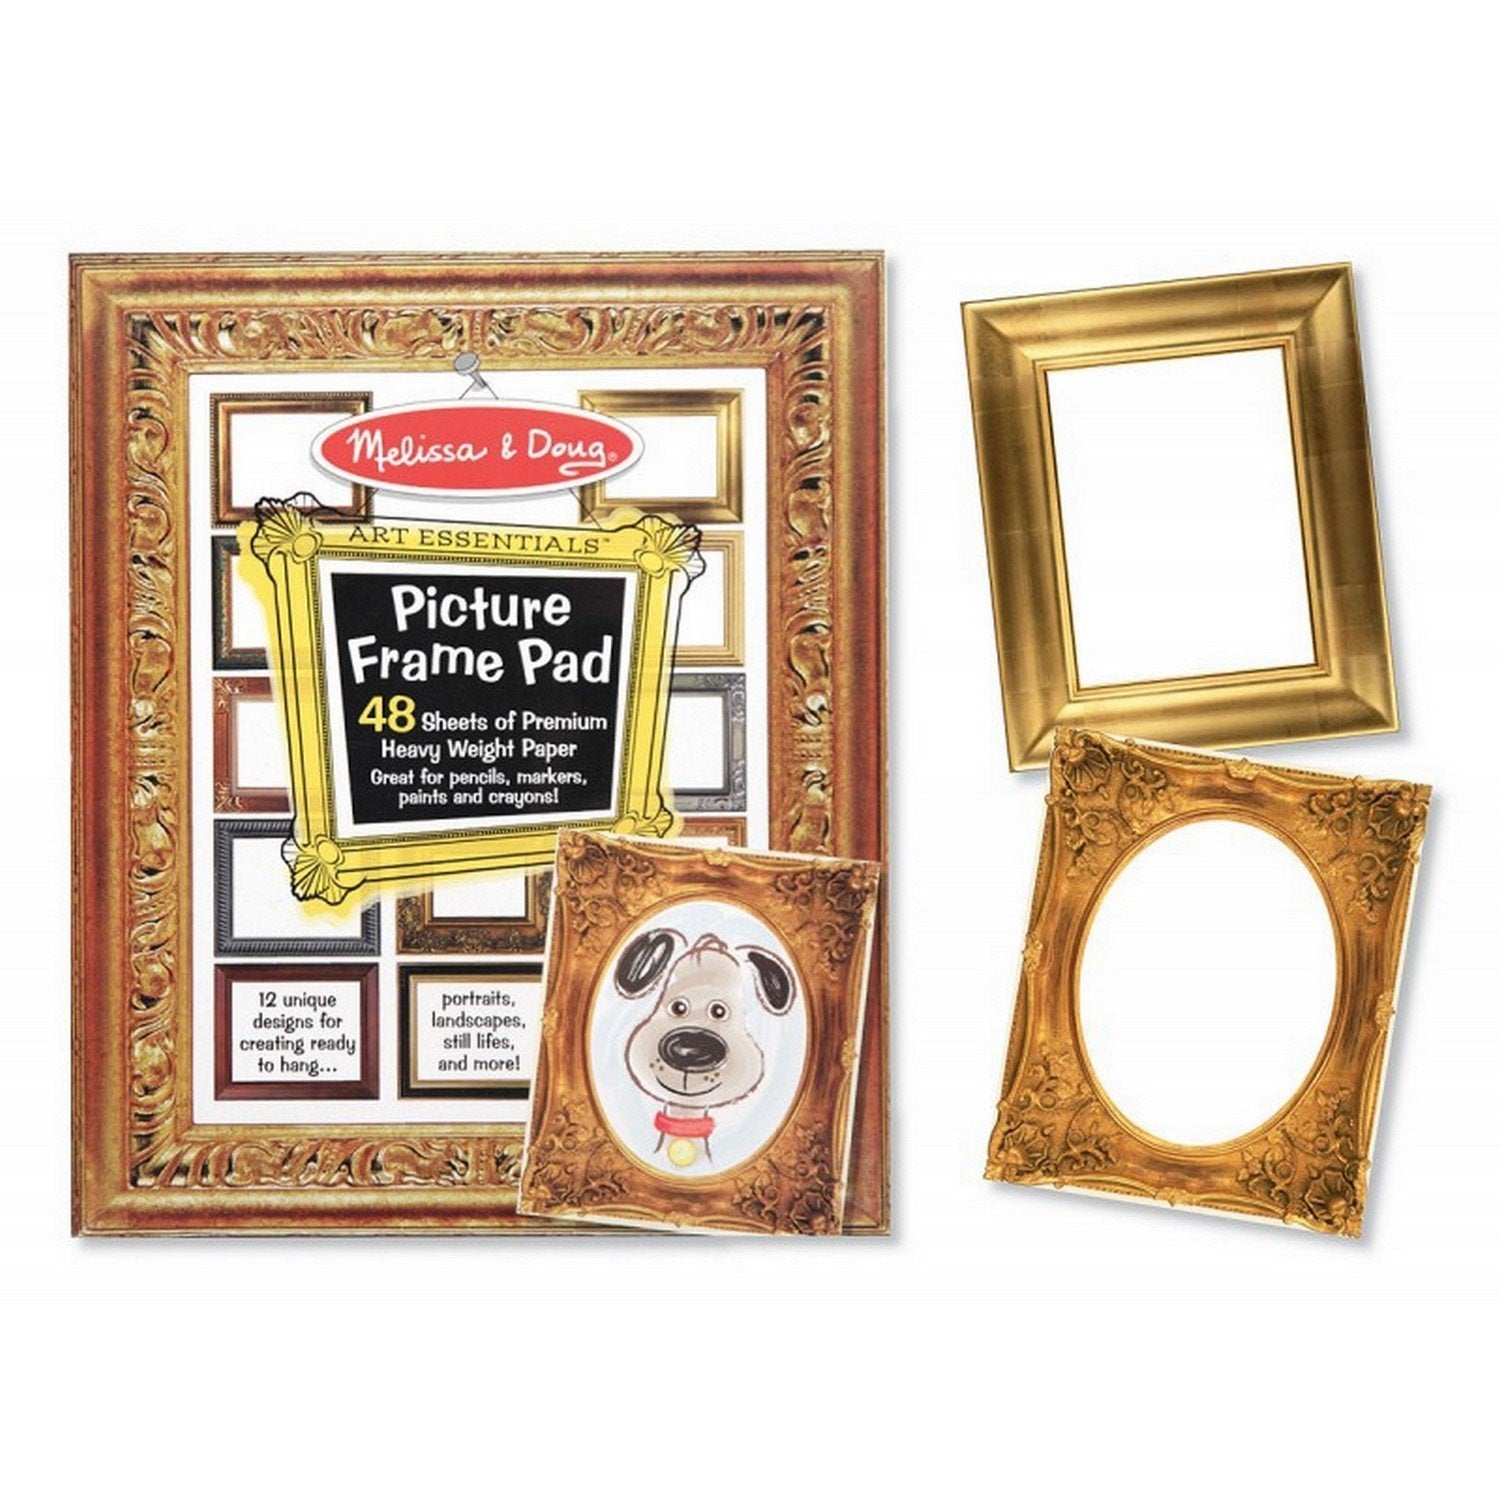 Melissa & Doug Picture Frame Pad (11 x 13 inches) - 48 Pages, 12